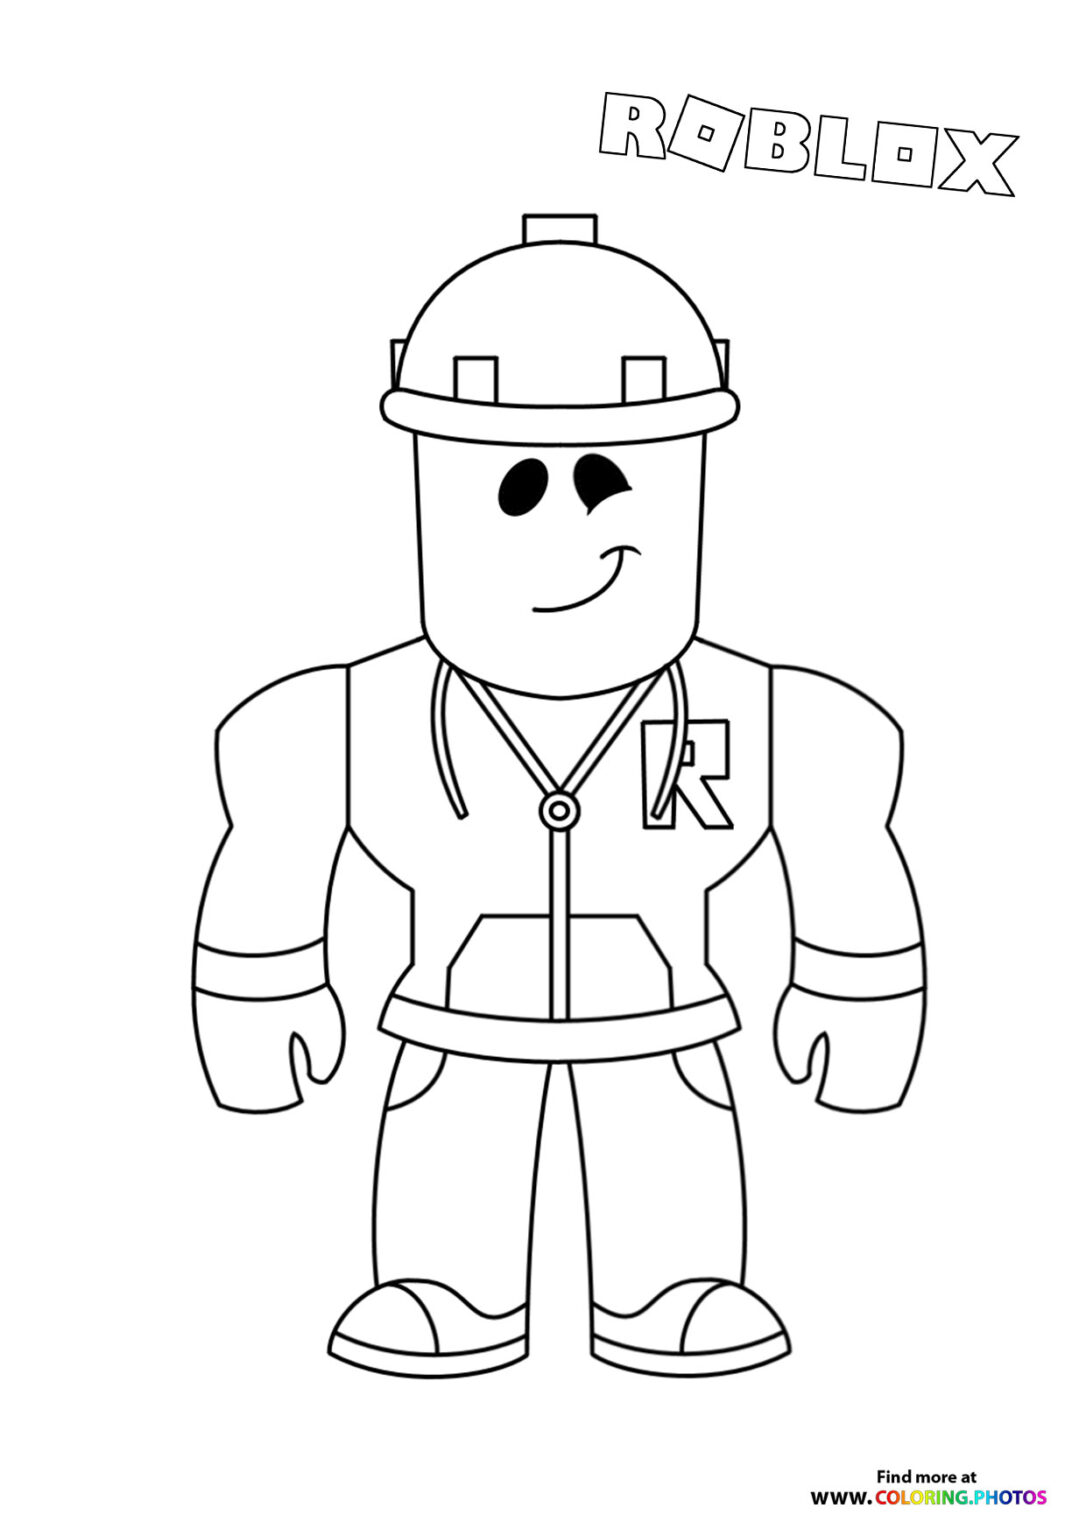 Roblox coloring pages | Free printable sheets for kids from Roblox game